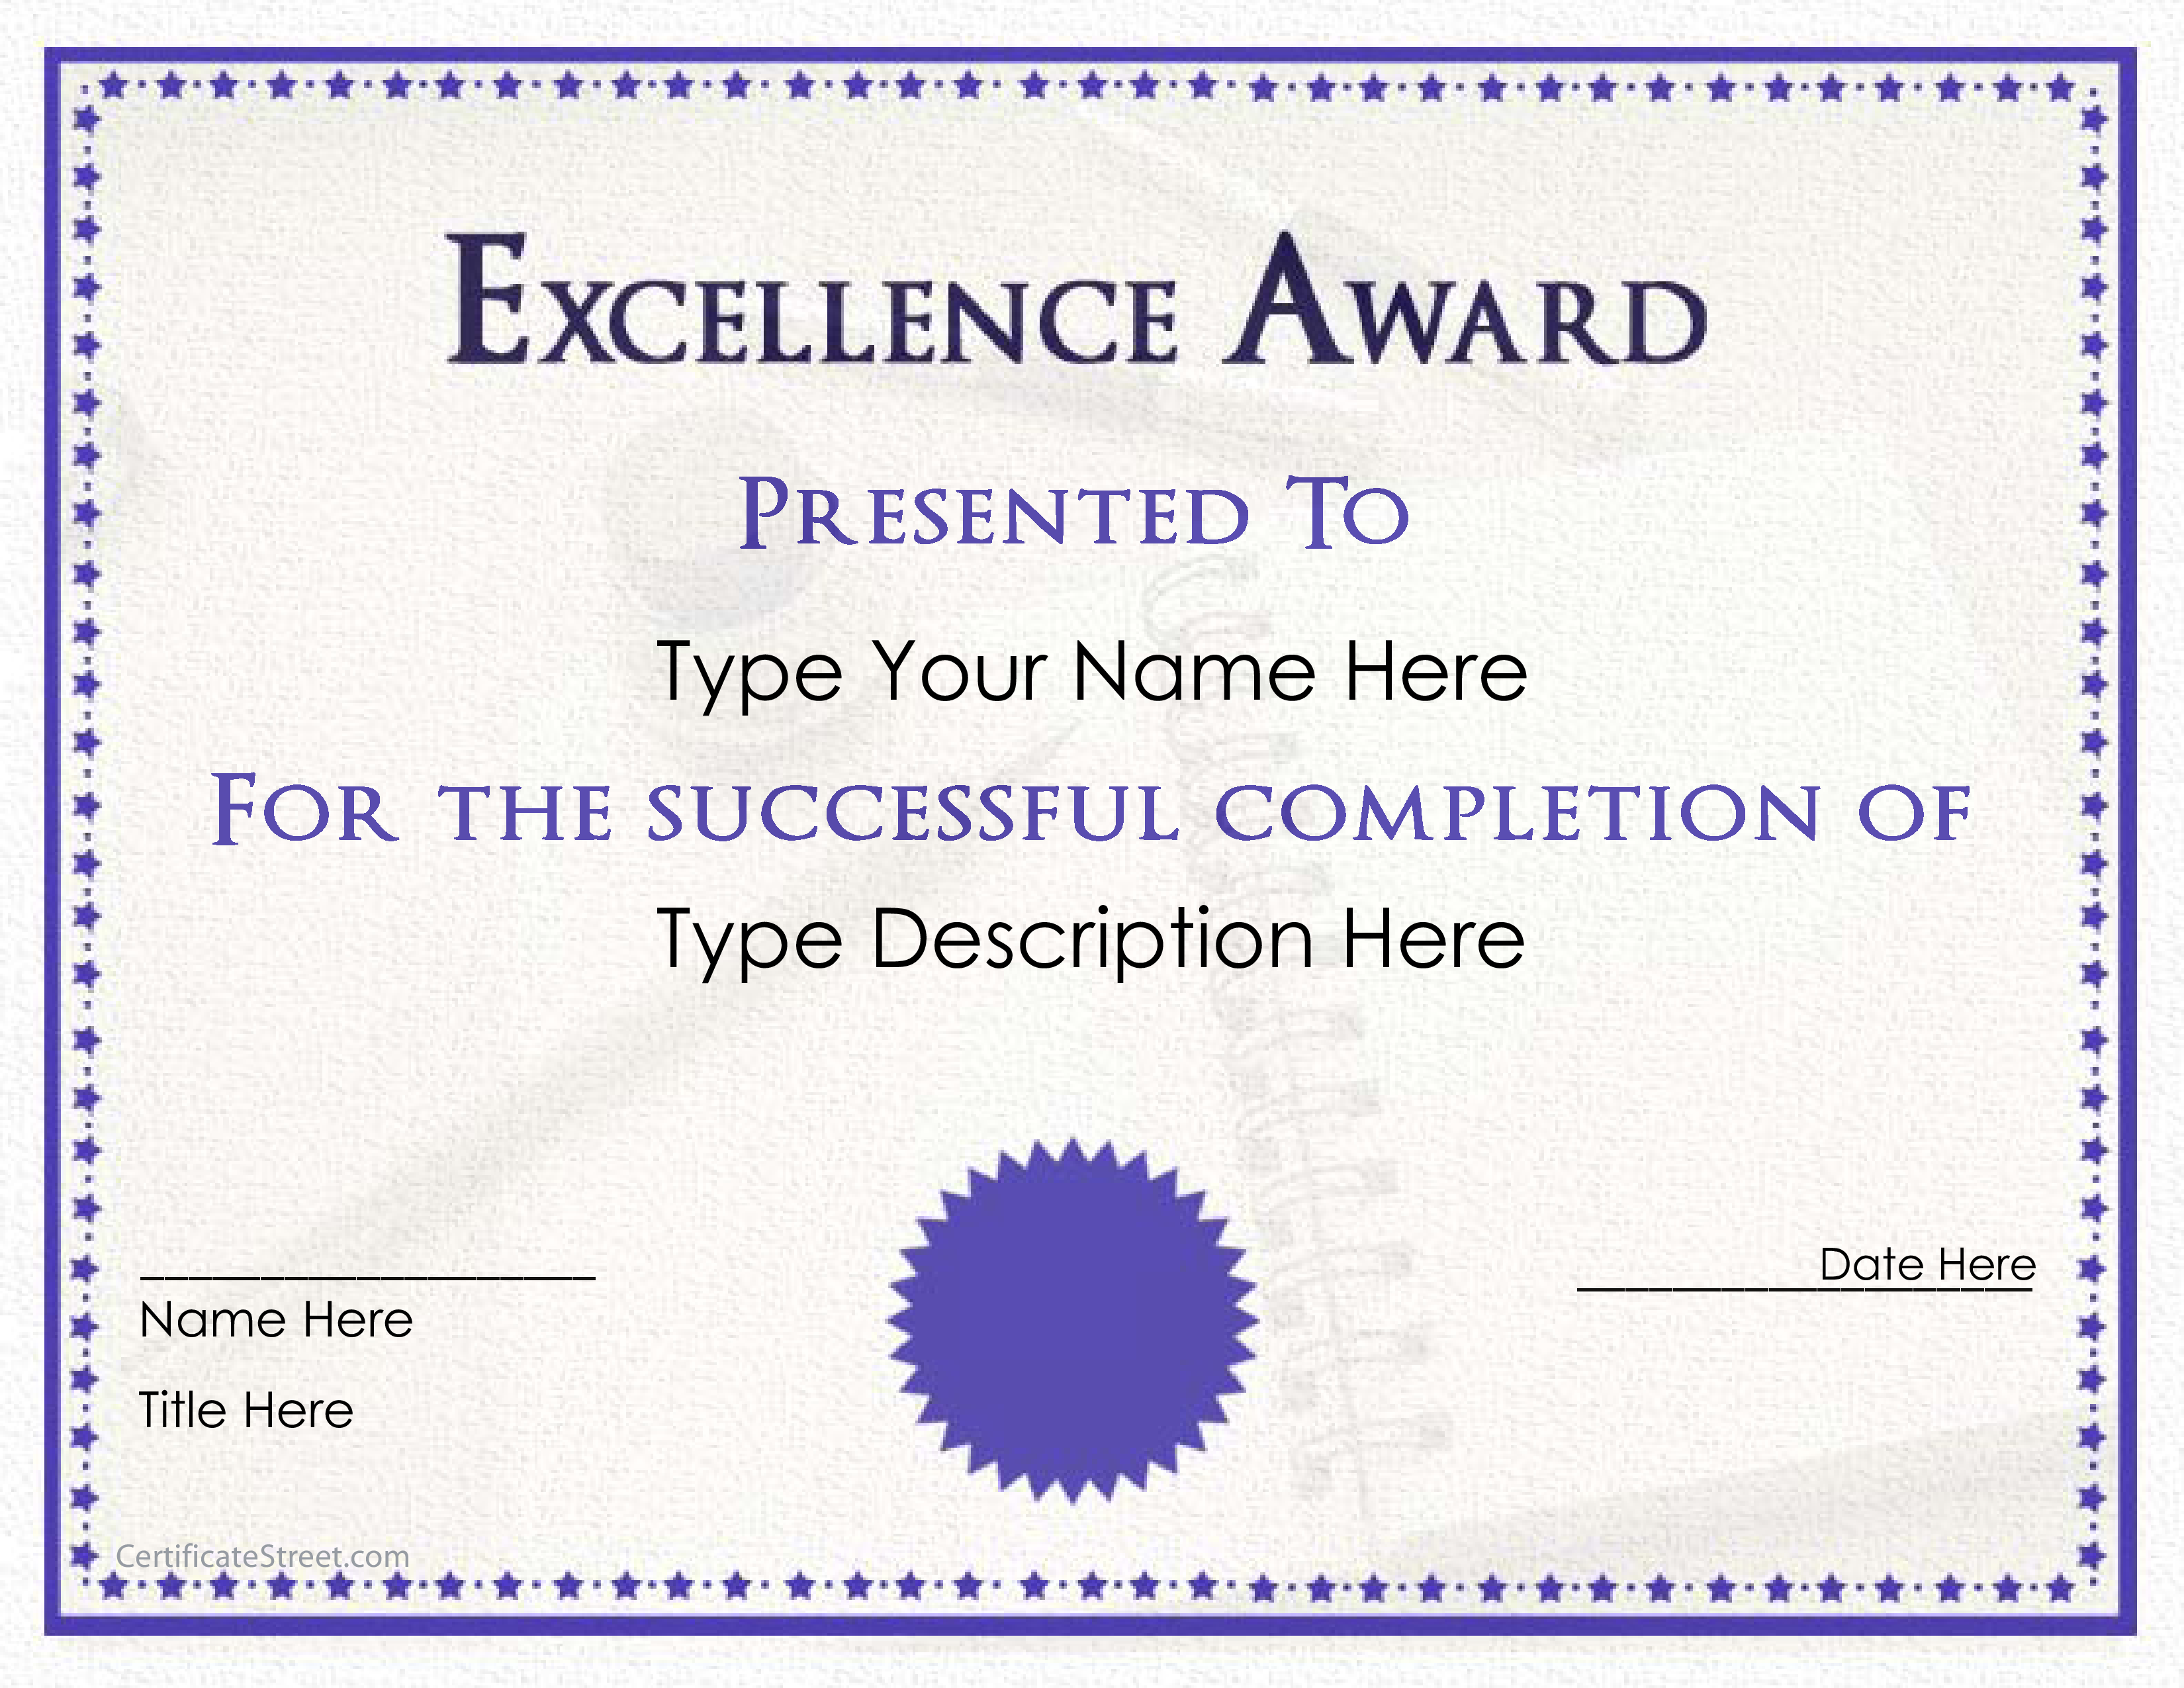 certificate of excellence template free download word